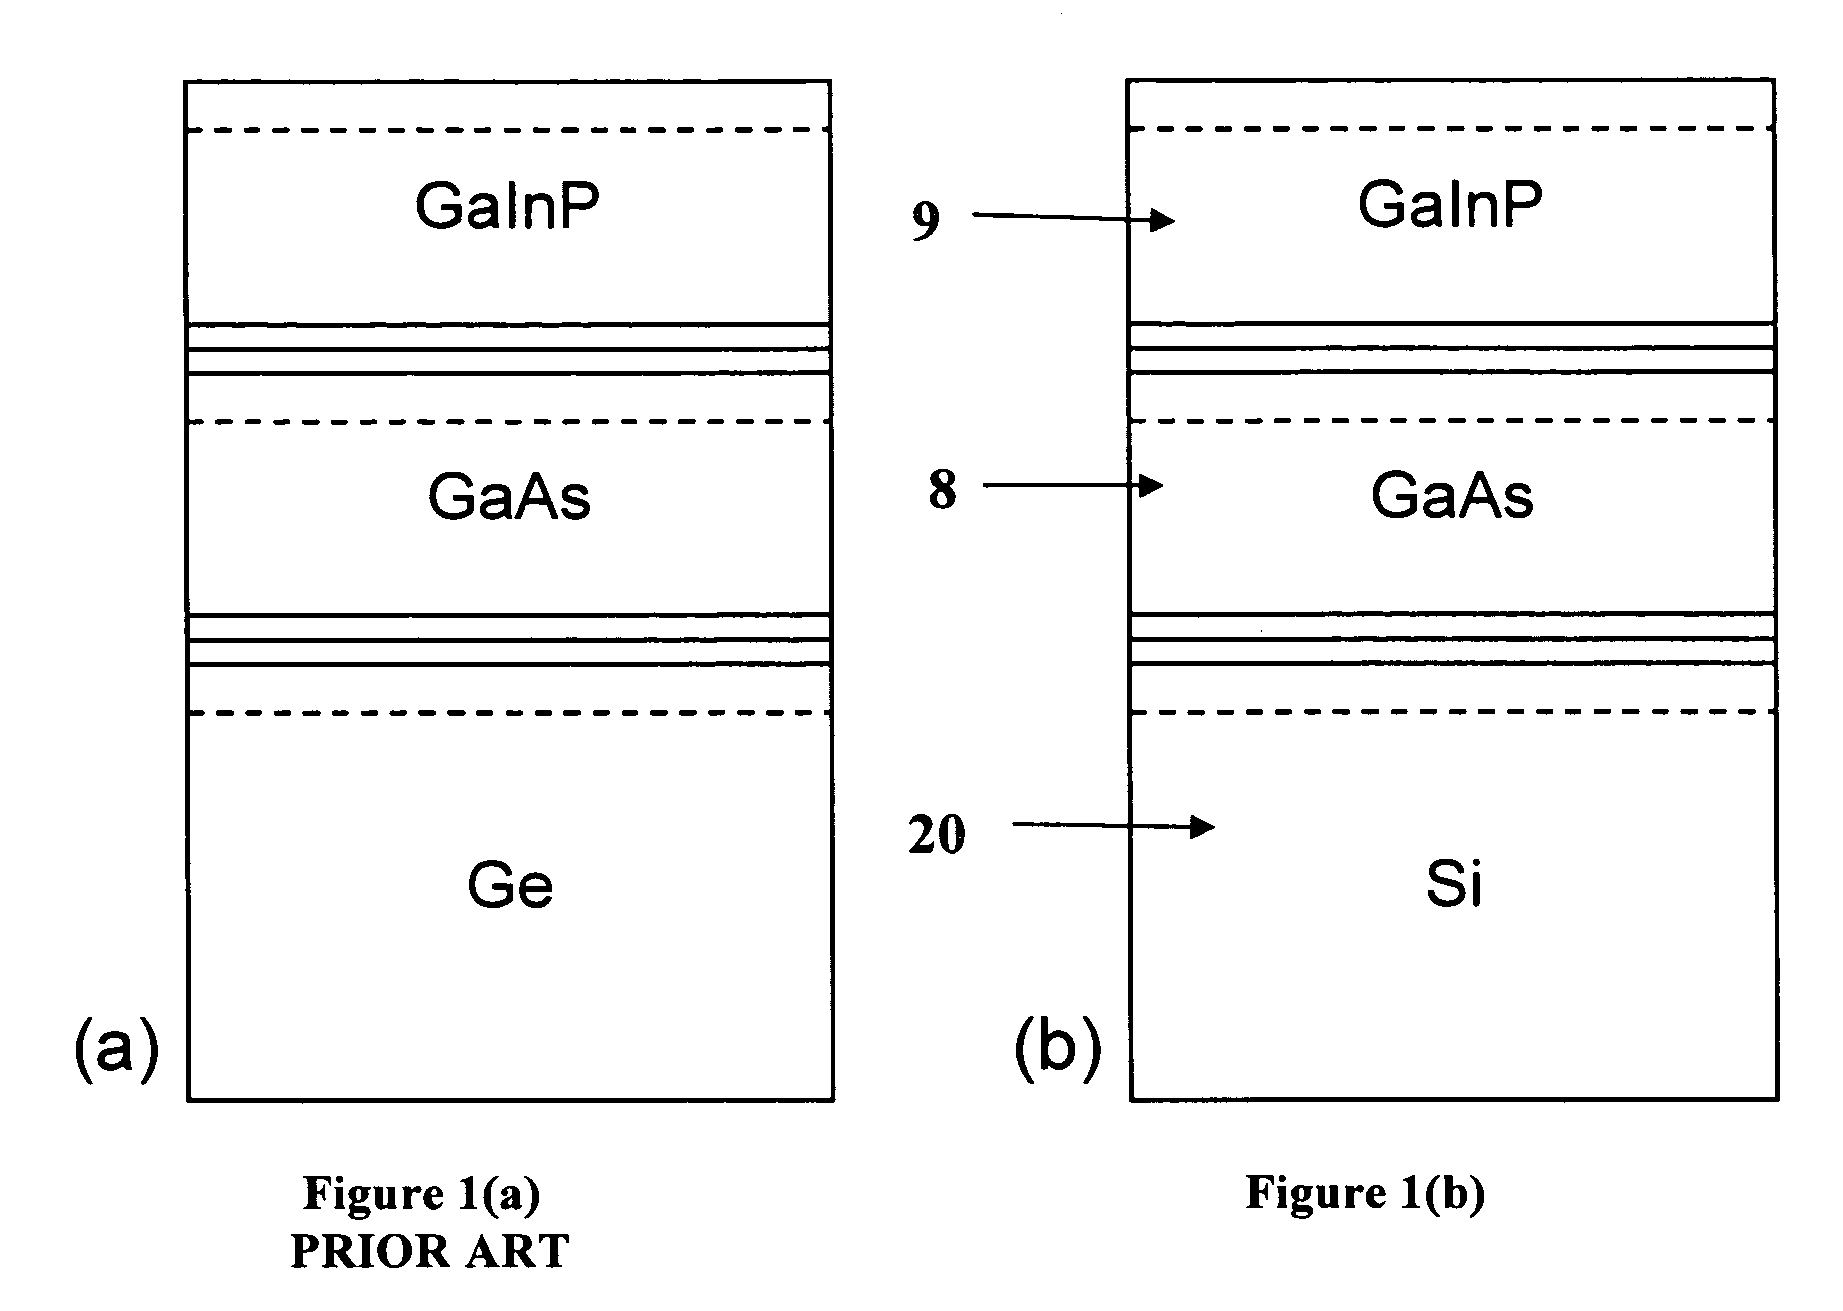 GaInP / GaAs / Si triple junction solar cell enabled by wafer bonding and layer transfer